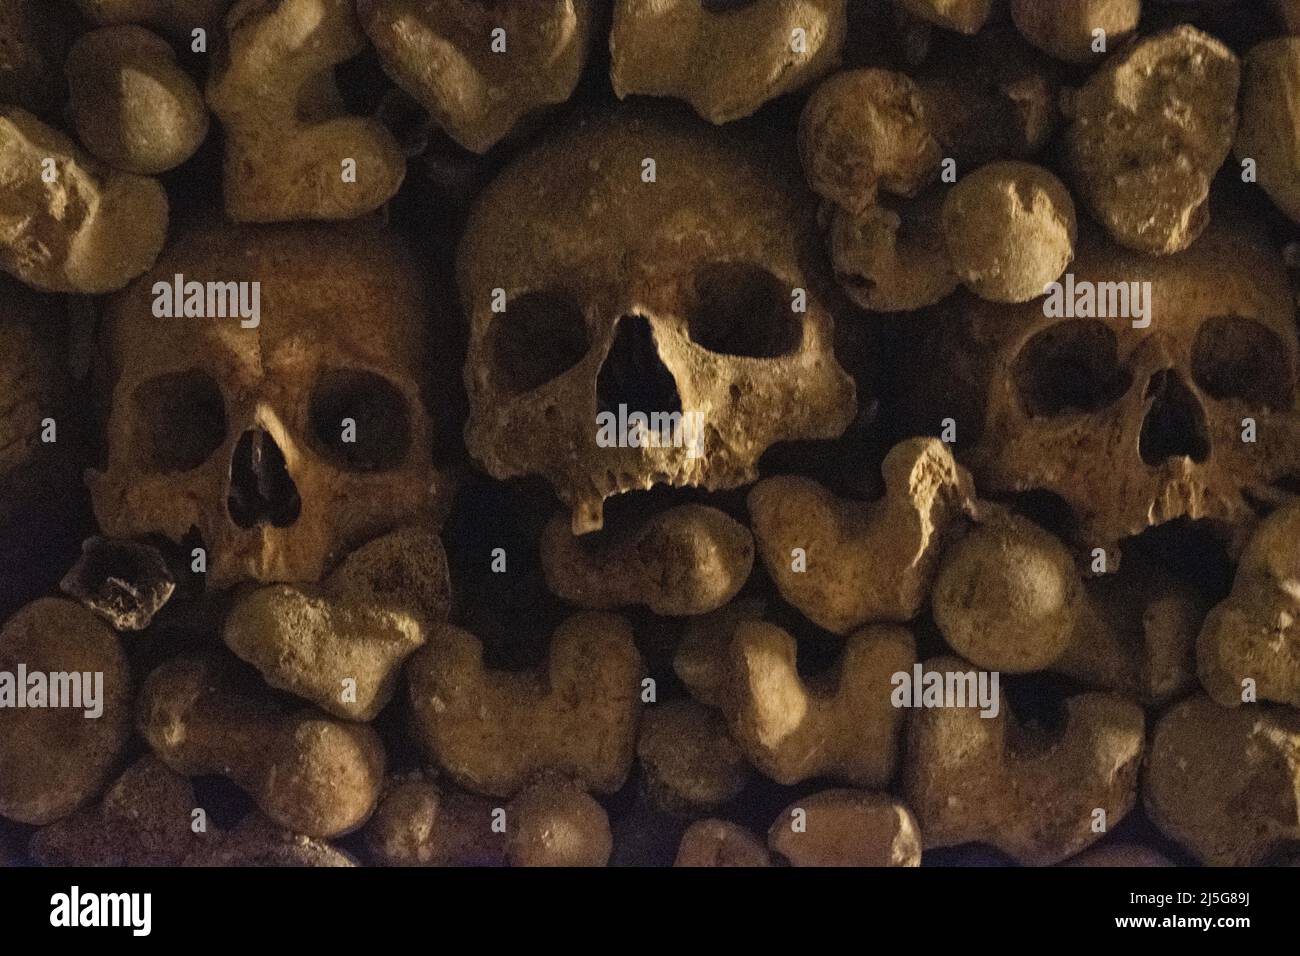 Paris: skulls and bones in the Catacombs of Paris, ossuary in an underground quarry 285 km long which hold the remains of more than 6 million people Stock Photo